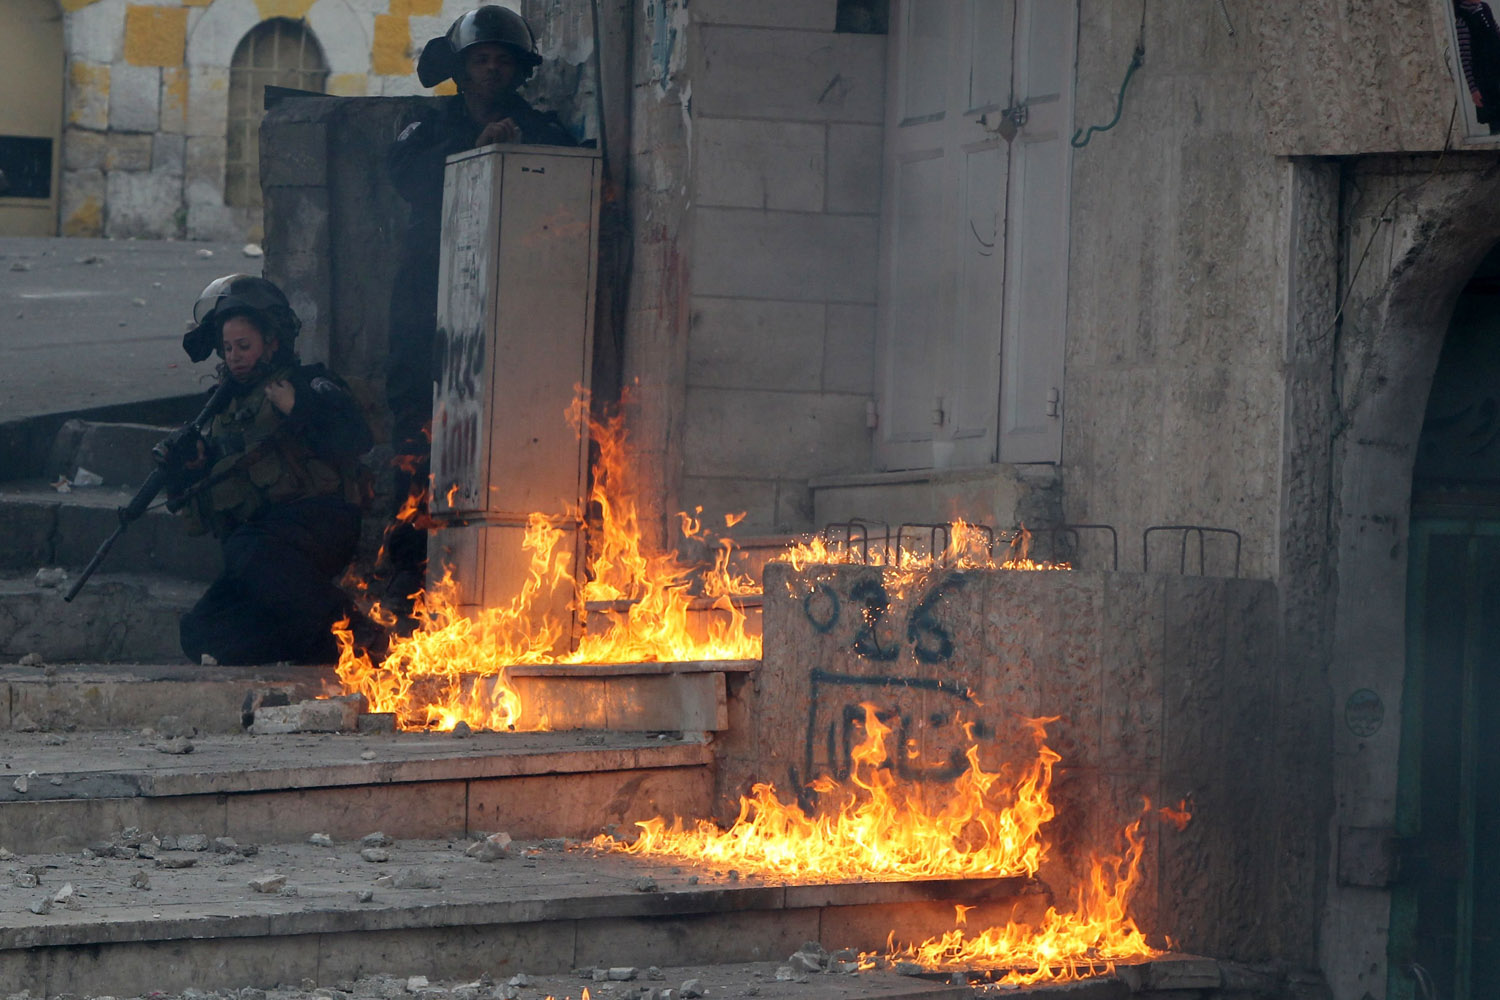 Nov. 27, 2013. A female Israeli border guard reacts after a petrol bomb thrown by Palestinian demonstrators, landed next to her during a demonstration in  the West Bank city of Hebron.